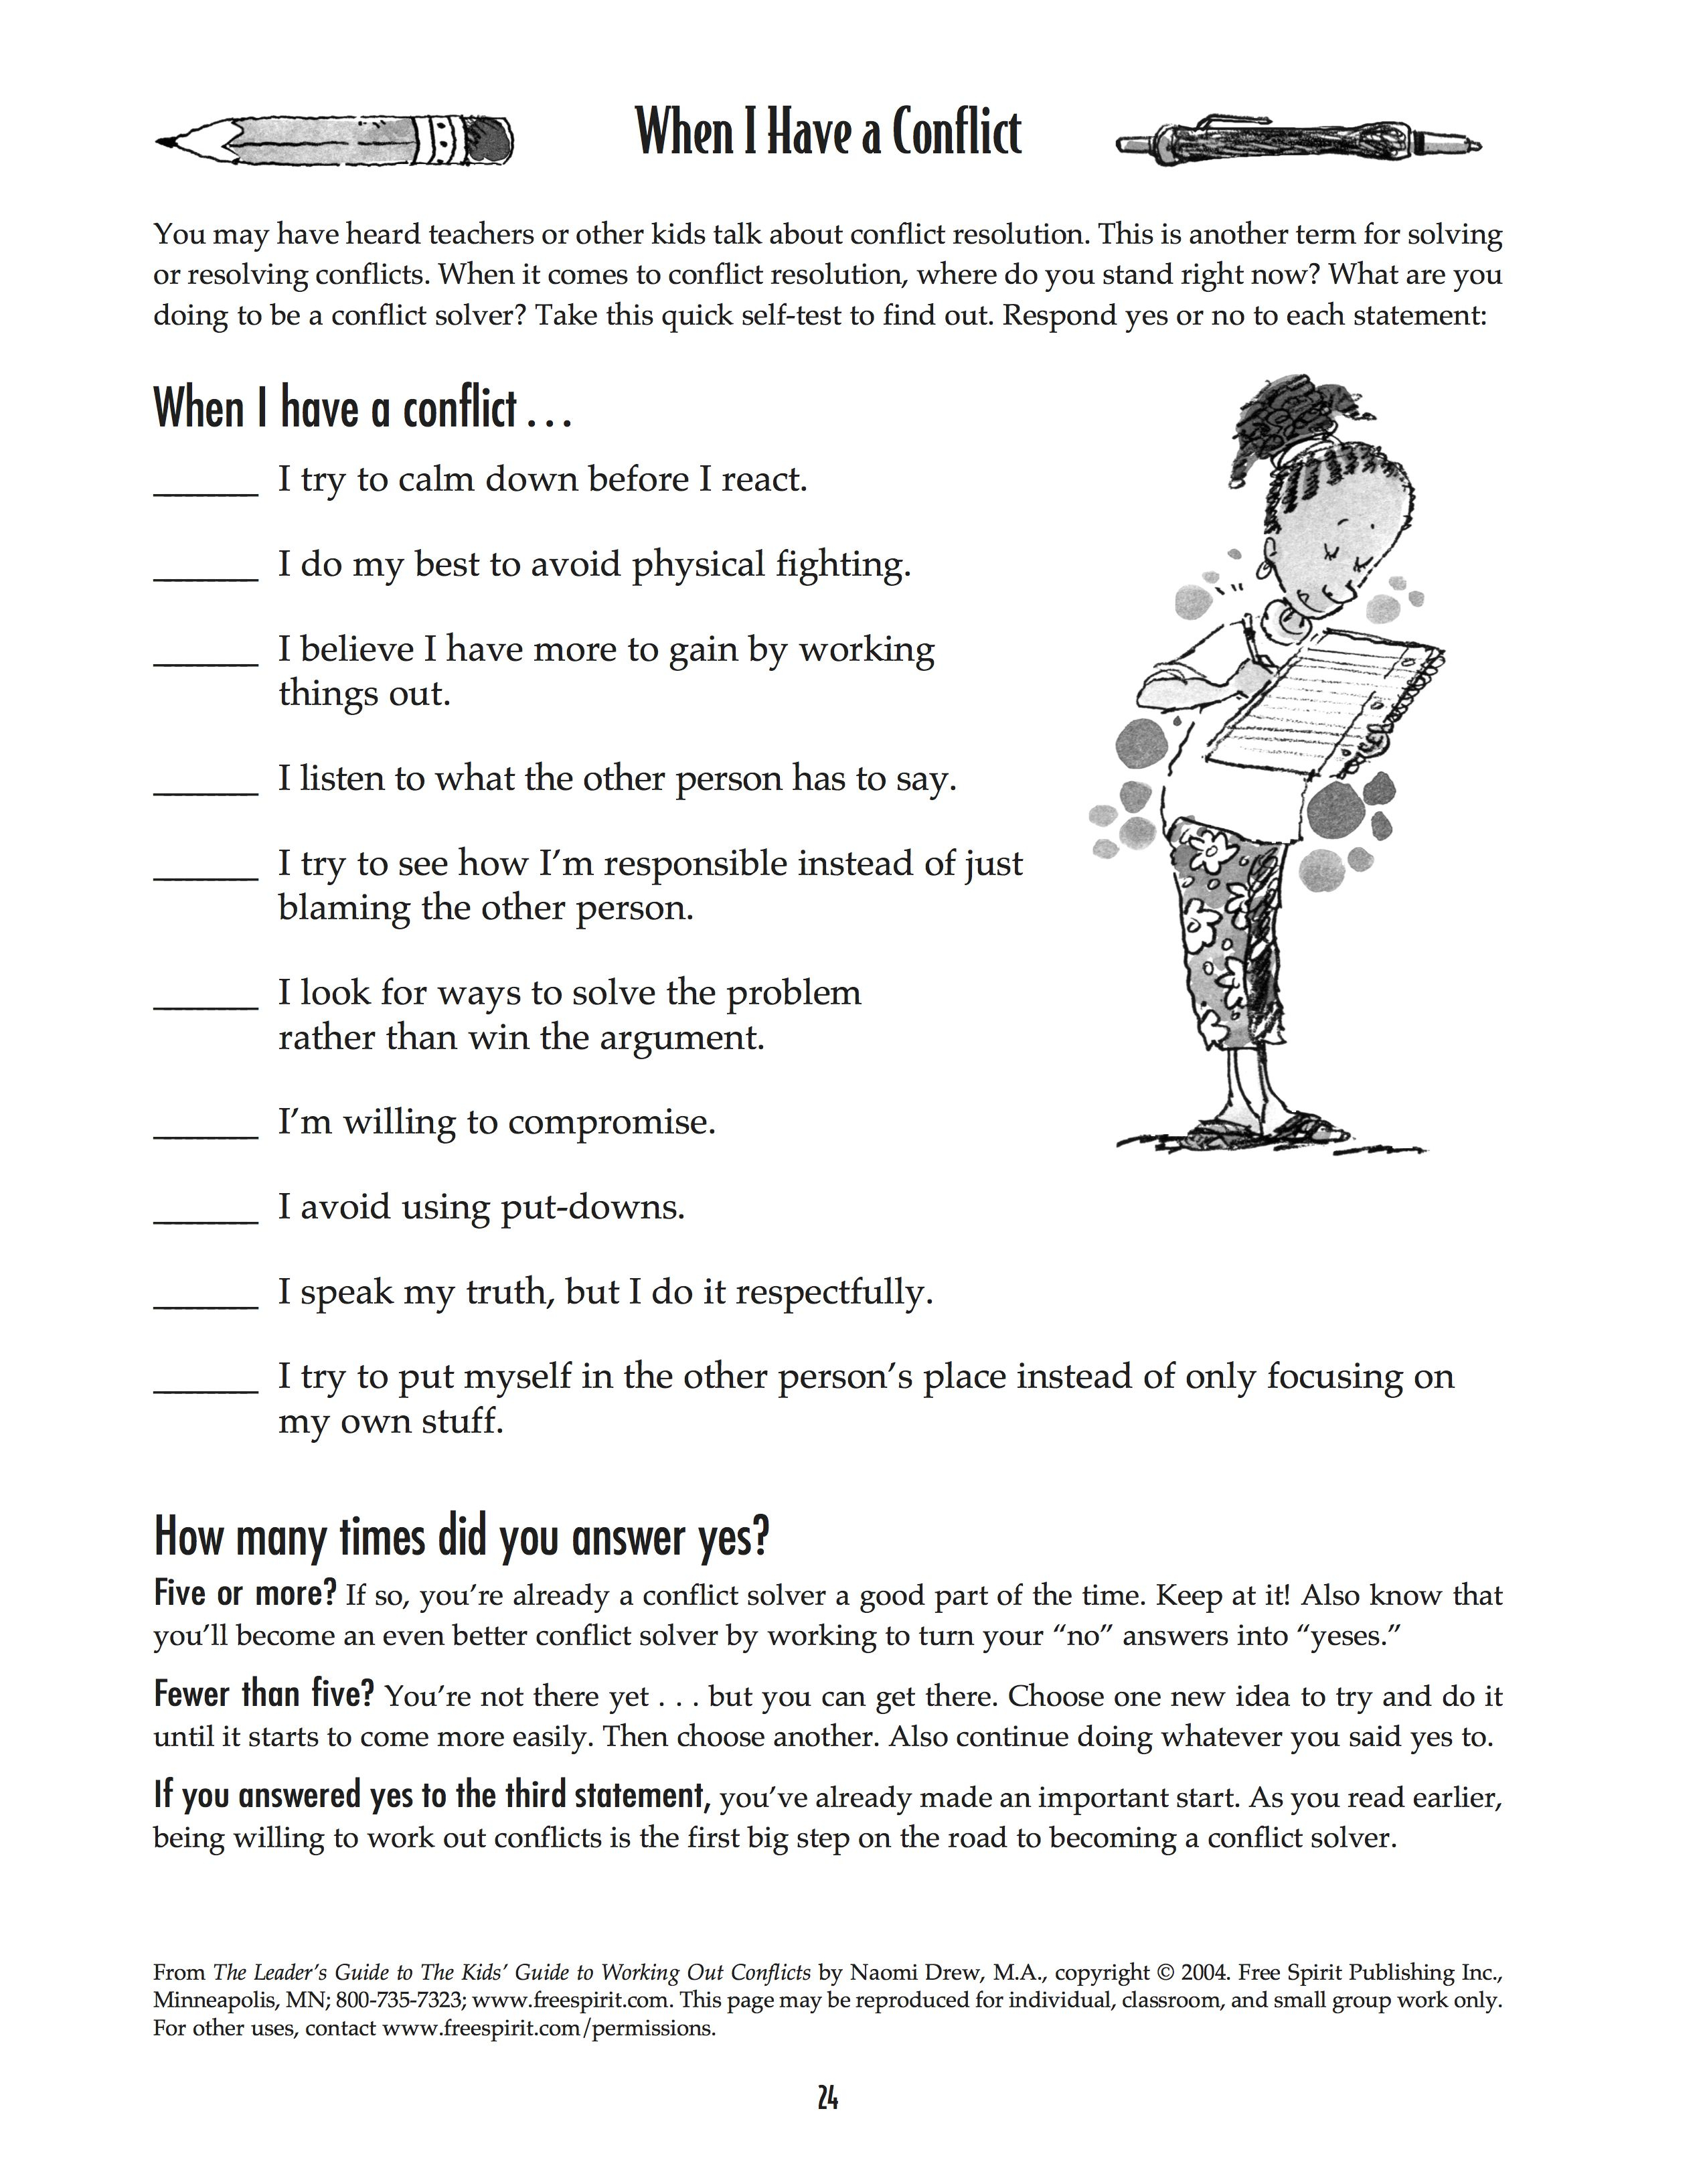 Free Printable Worksheet: When I Have A Conflict. A Quick Self-Test | Free Printable Worksheets On Means Of Communication